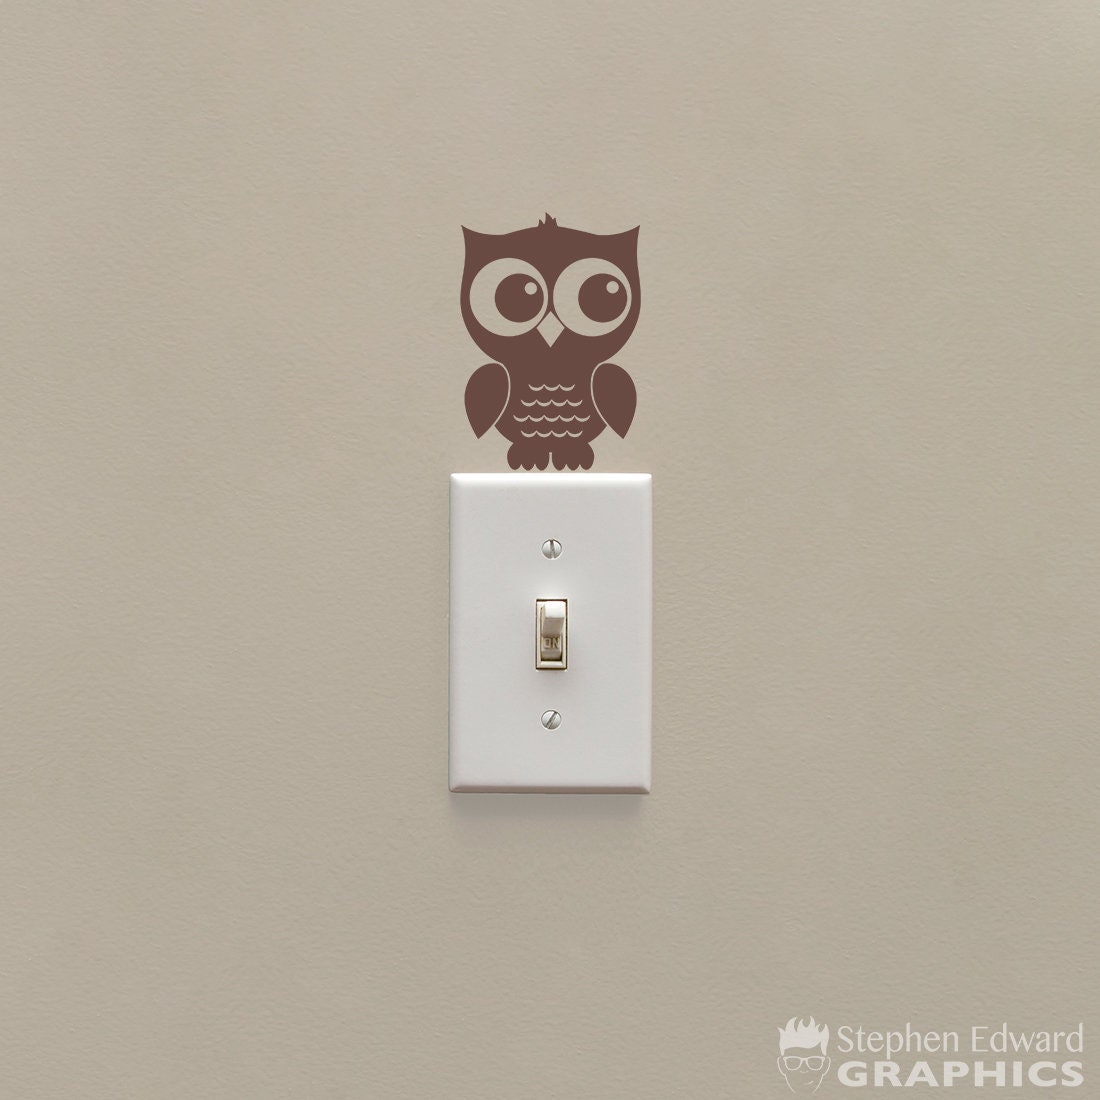 Owl Light Switch Decal - Lightswitch Owl Decal - Light Switch Cover decor